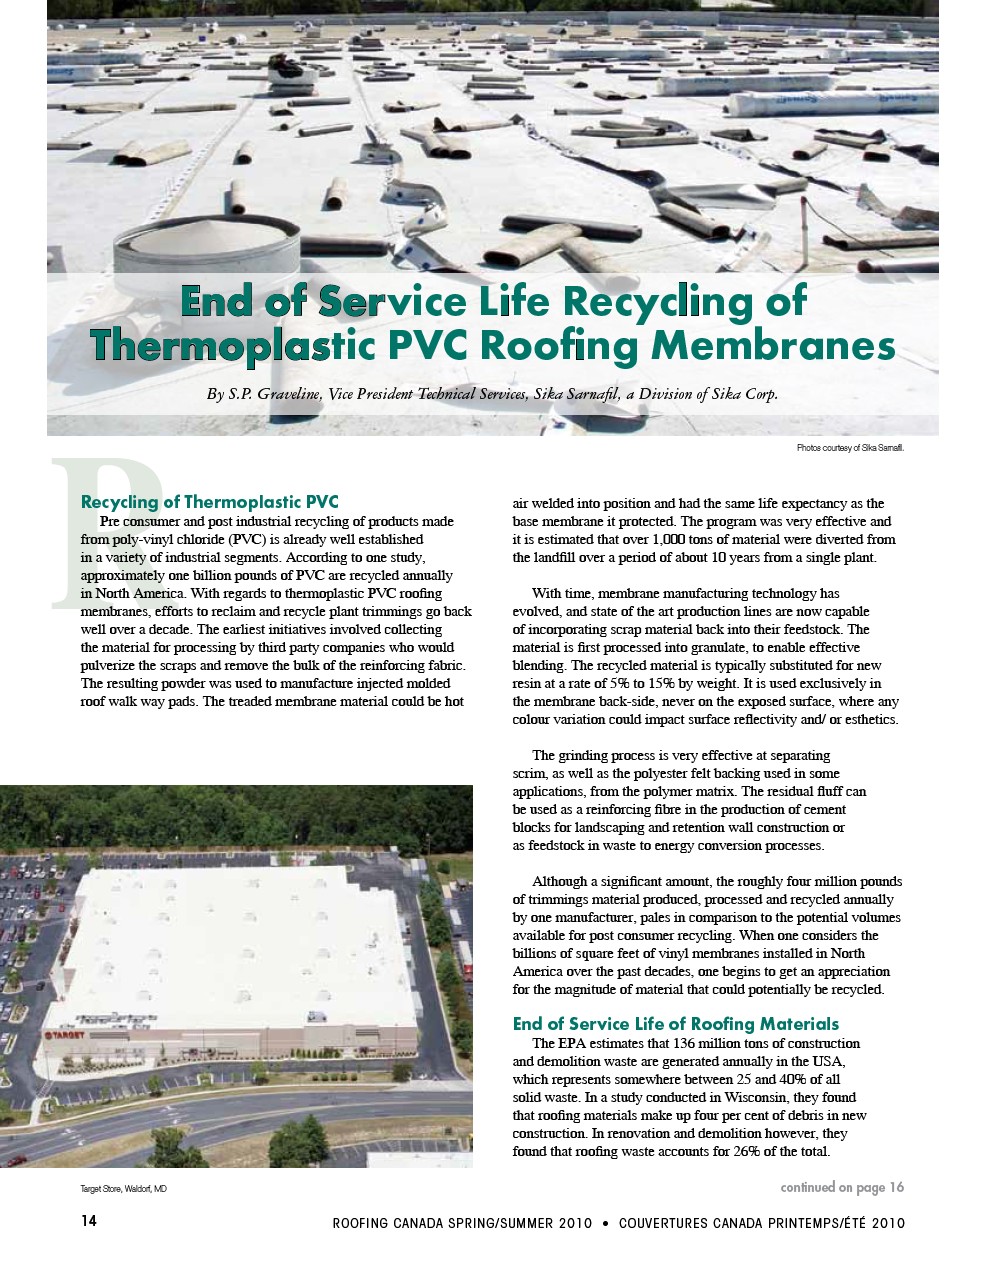 End of service life recycling of PVC membranes